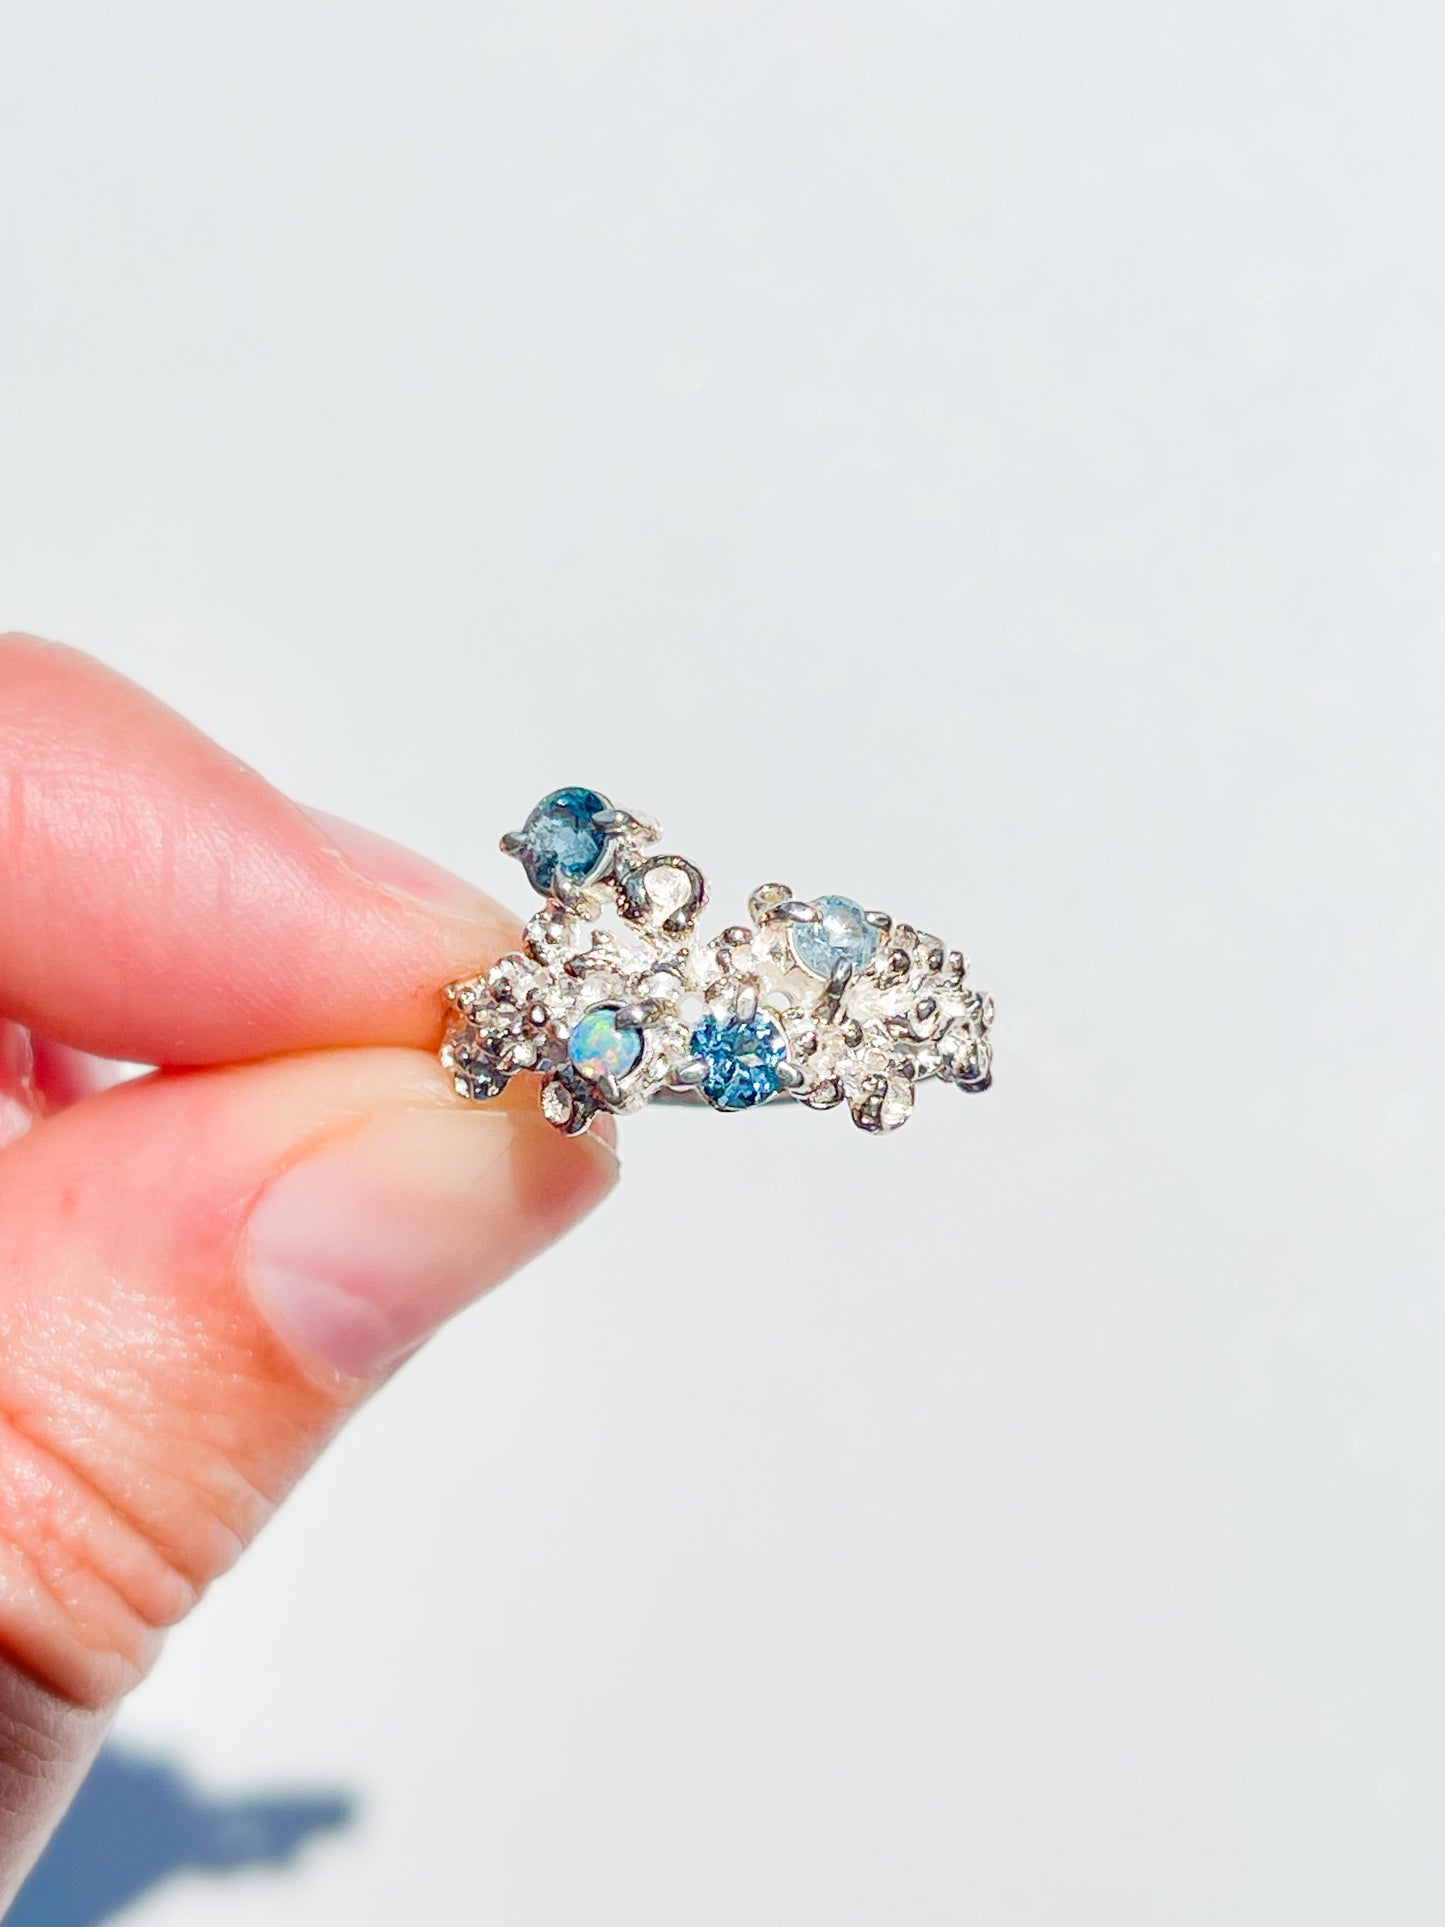 Coral Ring Silver with Blue Sapphires, Aquamarine & Opal - size 7